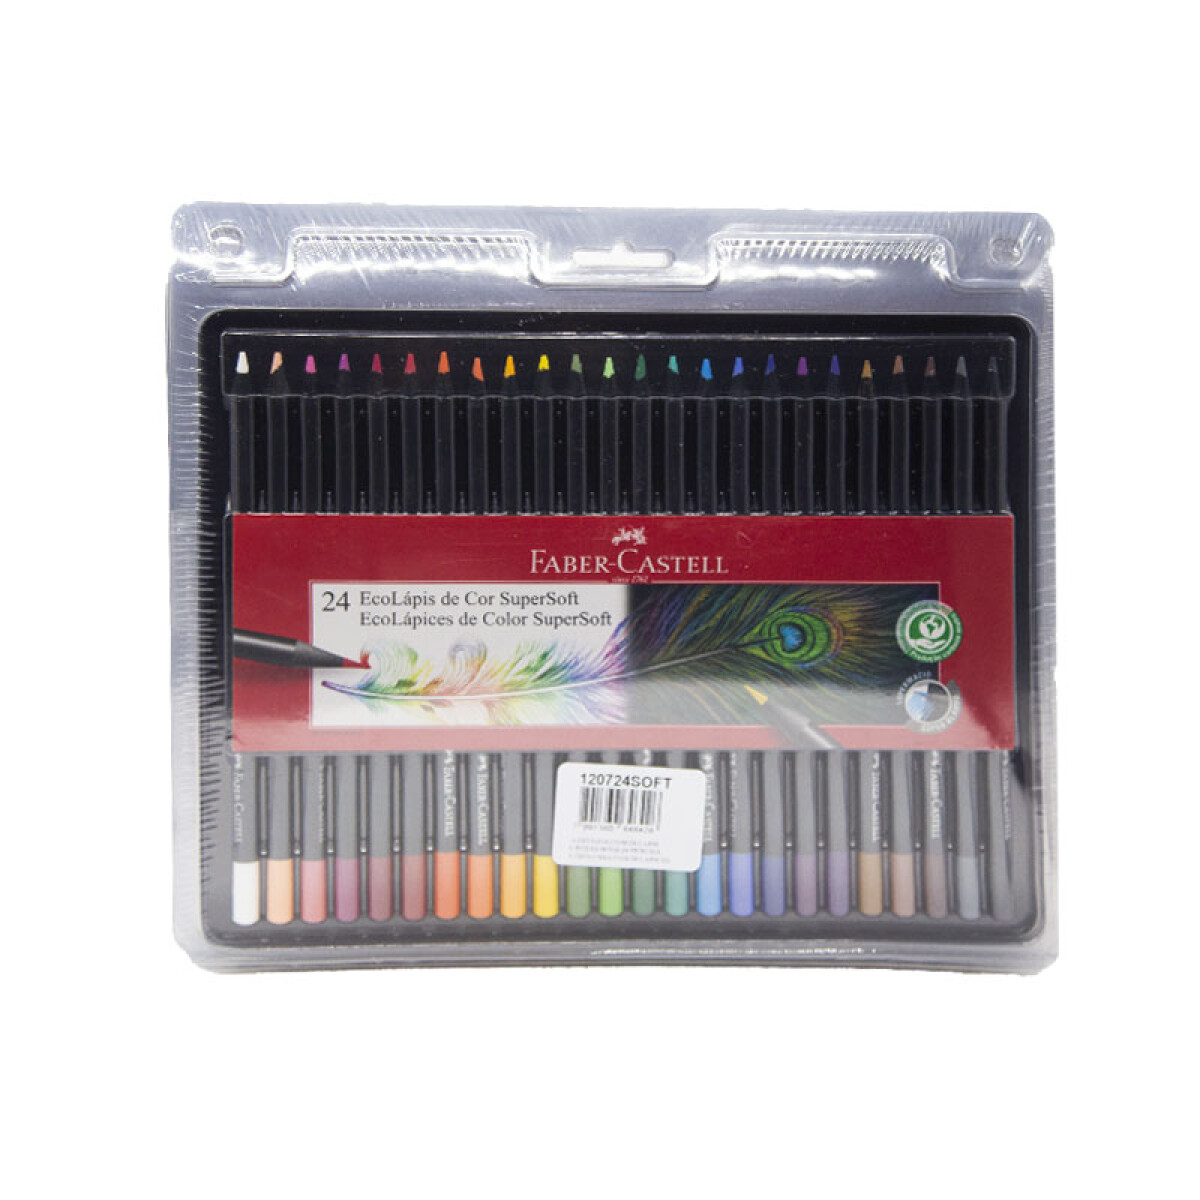 FABER CASTELL Colers SUPERSOFT 24 Largos 